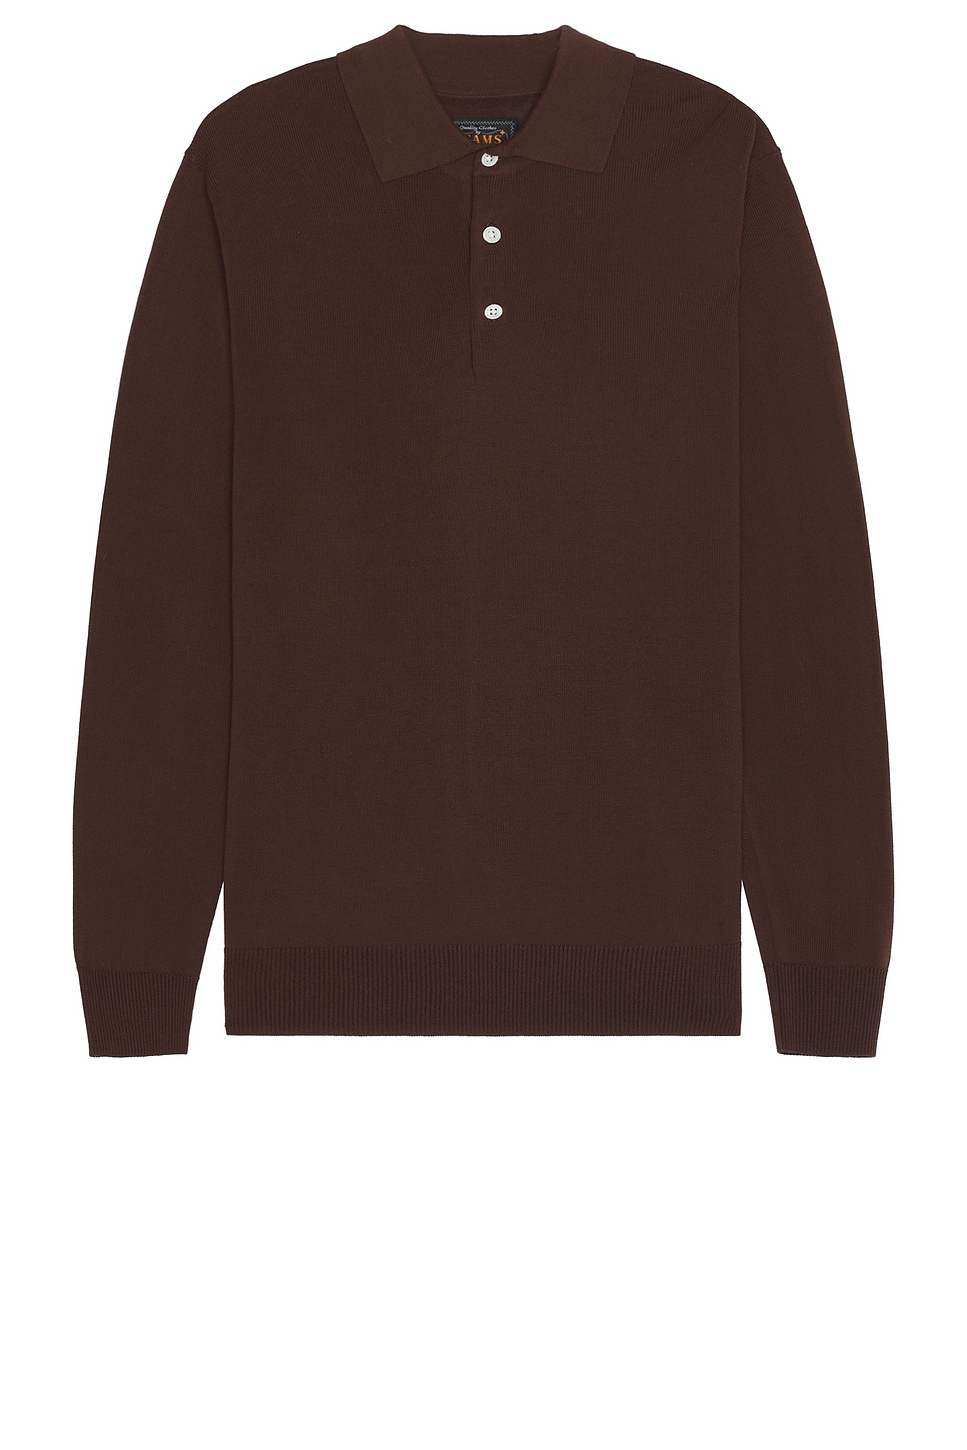 Image 1 of Beams Plus Knit Polo in Brown